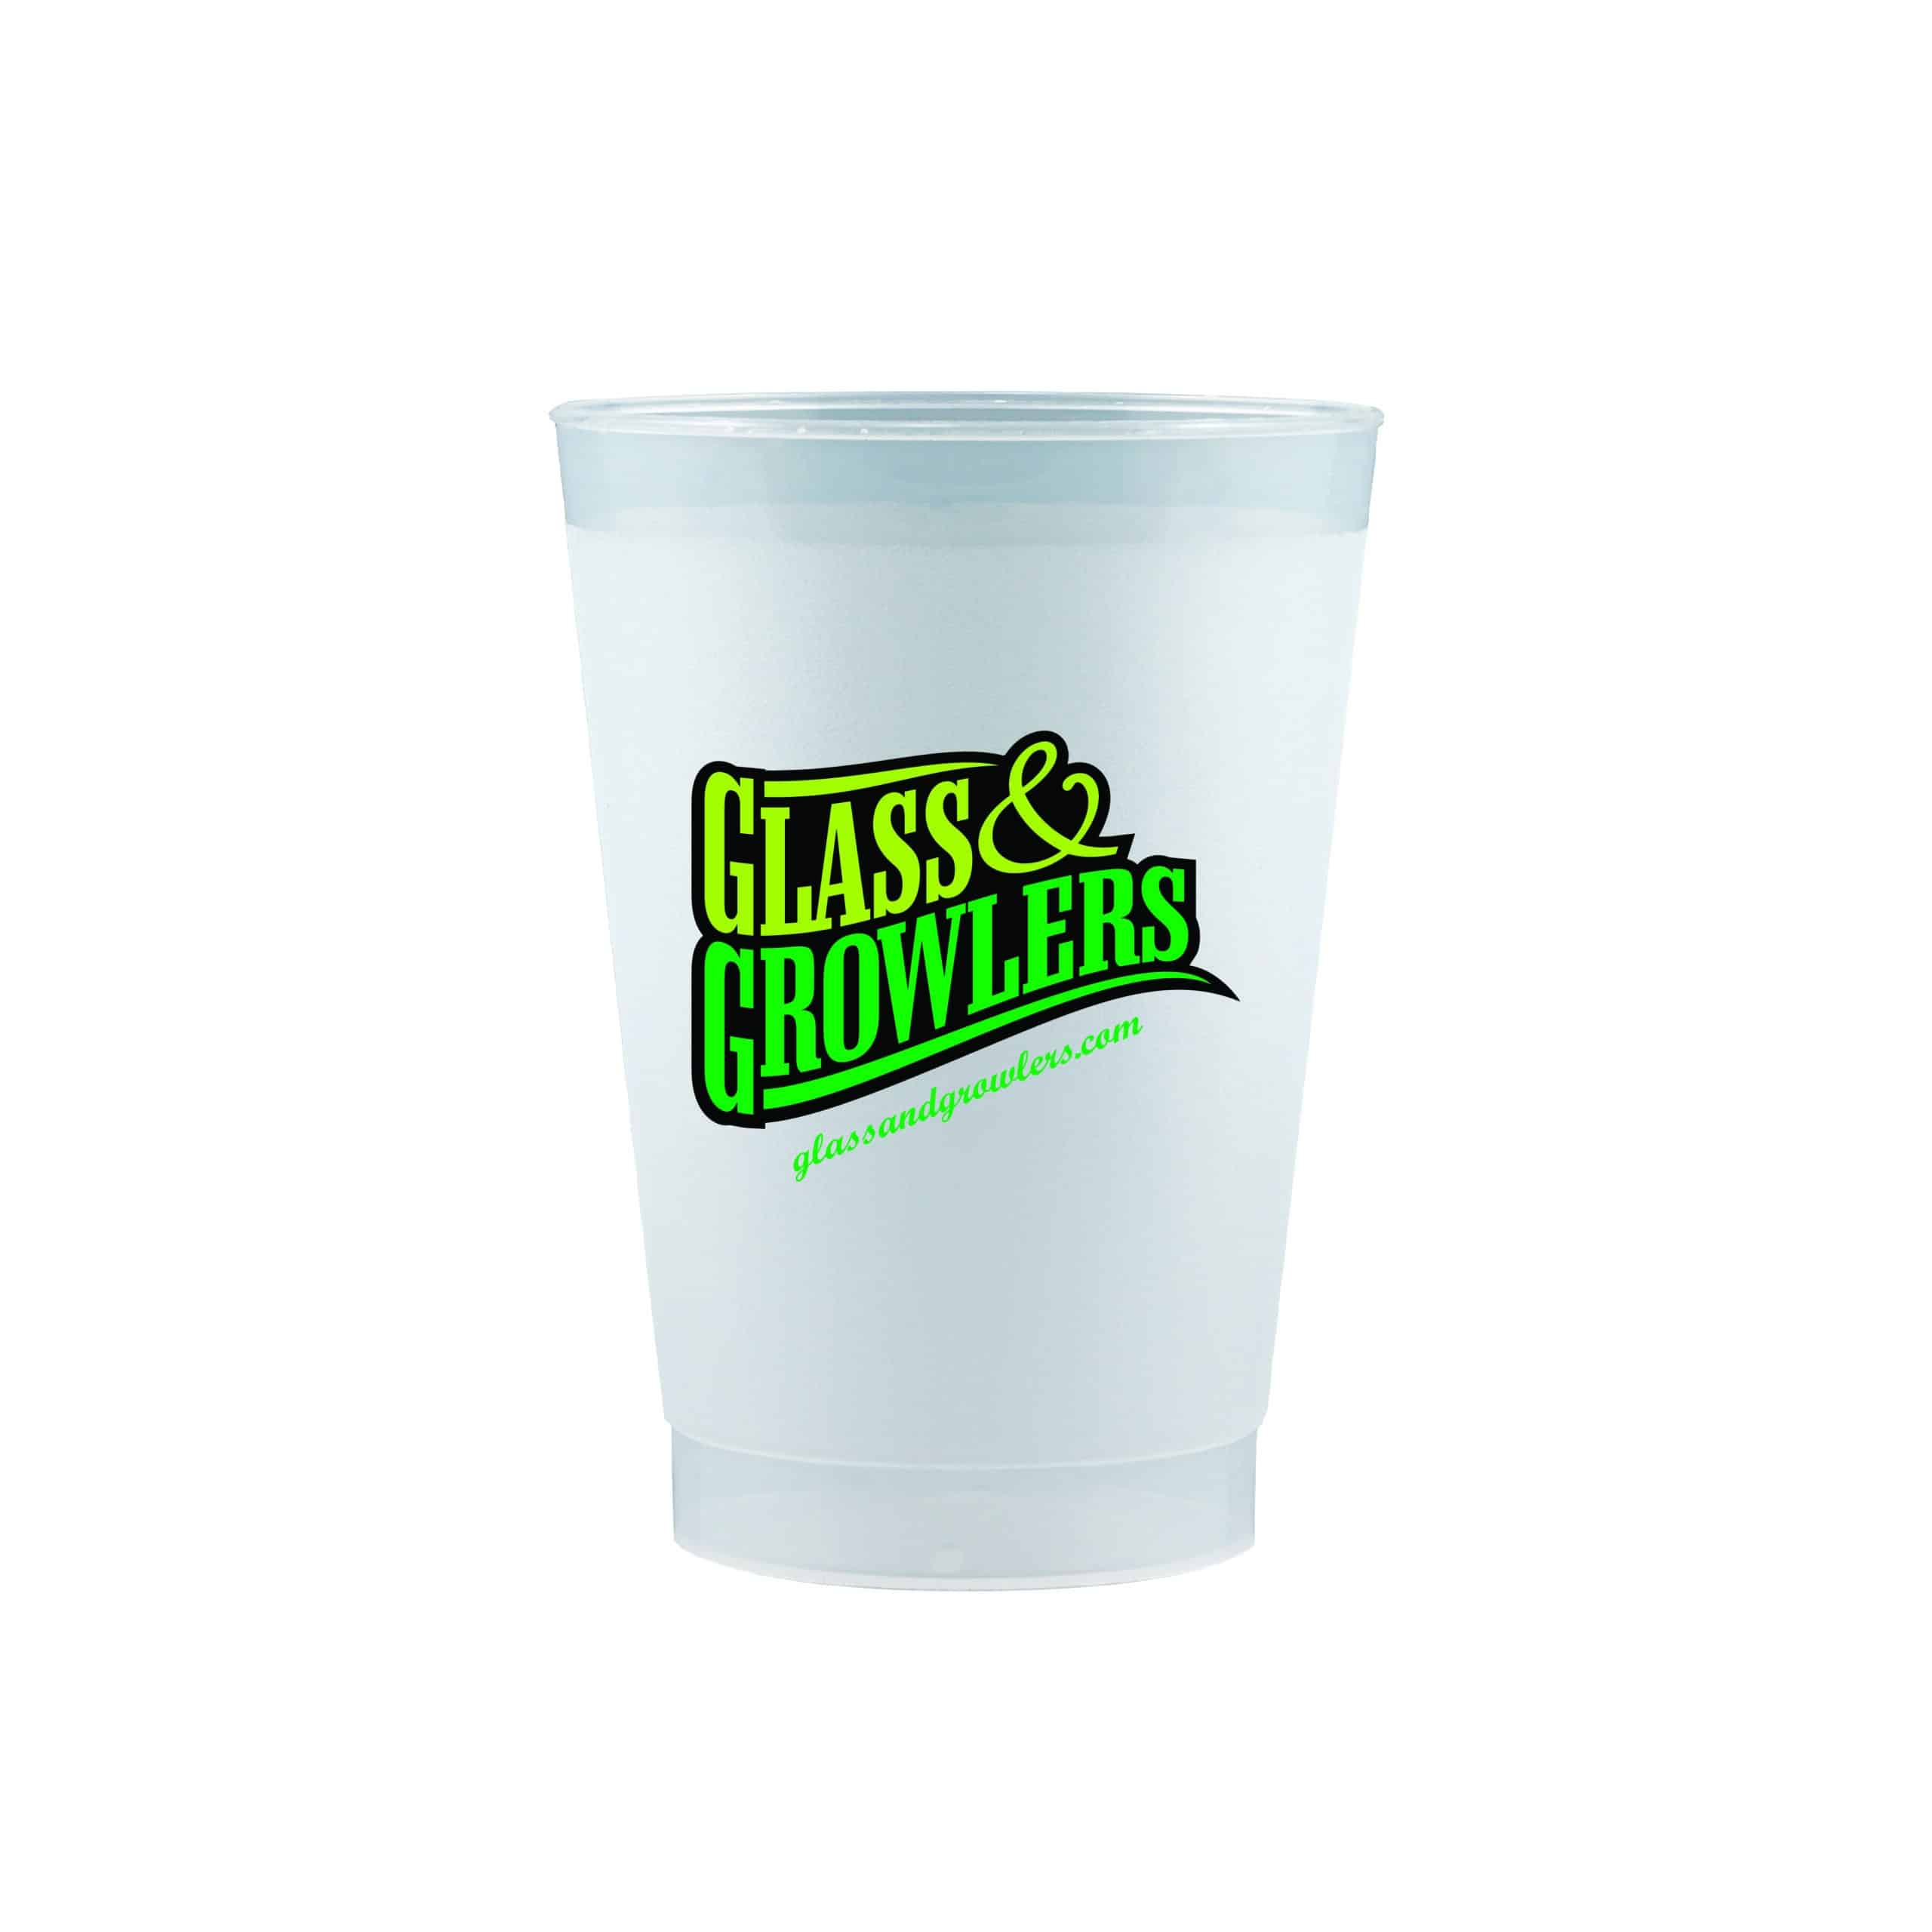 2 Oz. Neon Assorted Color Plastic Cups - 60 Ct.